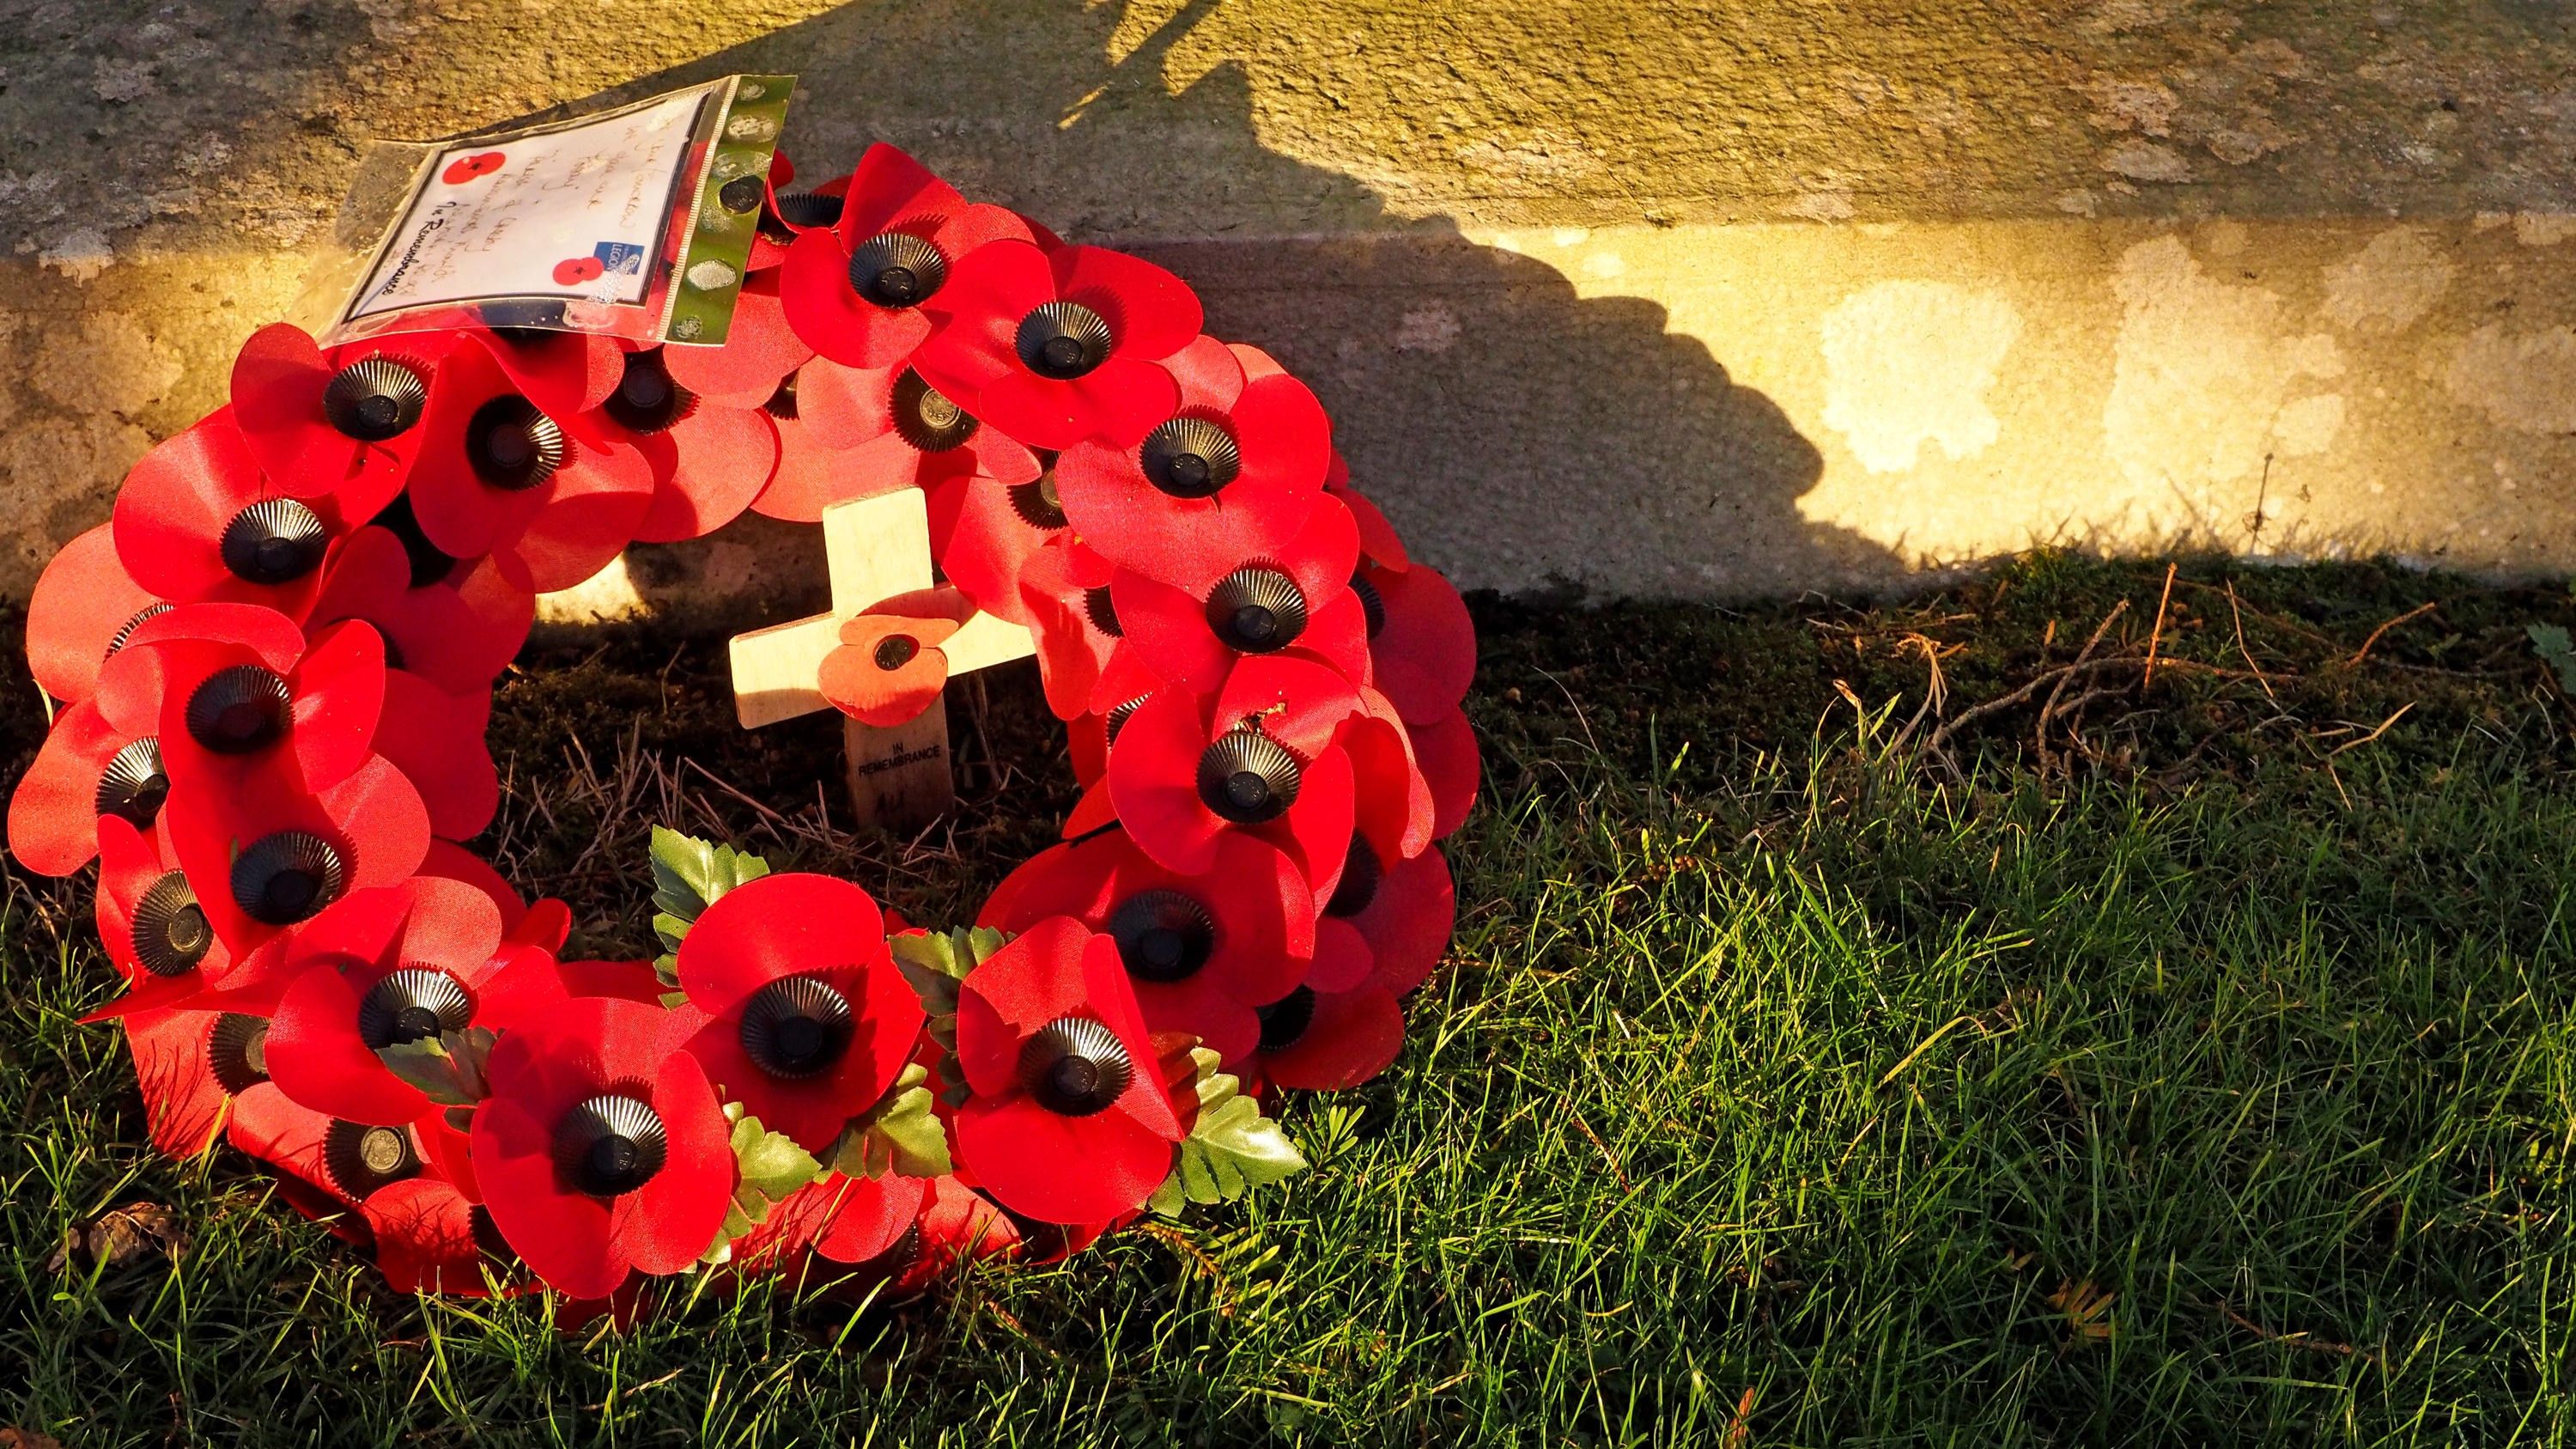 Millions fall silent for Remembrance Day